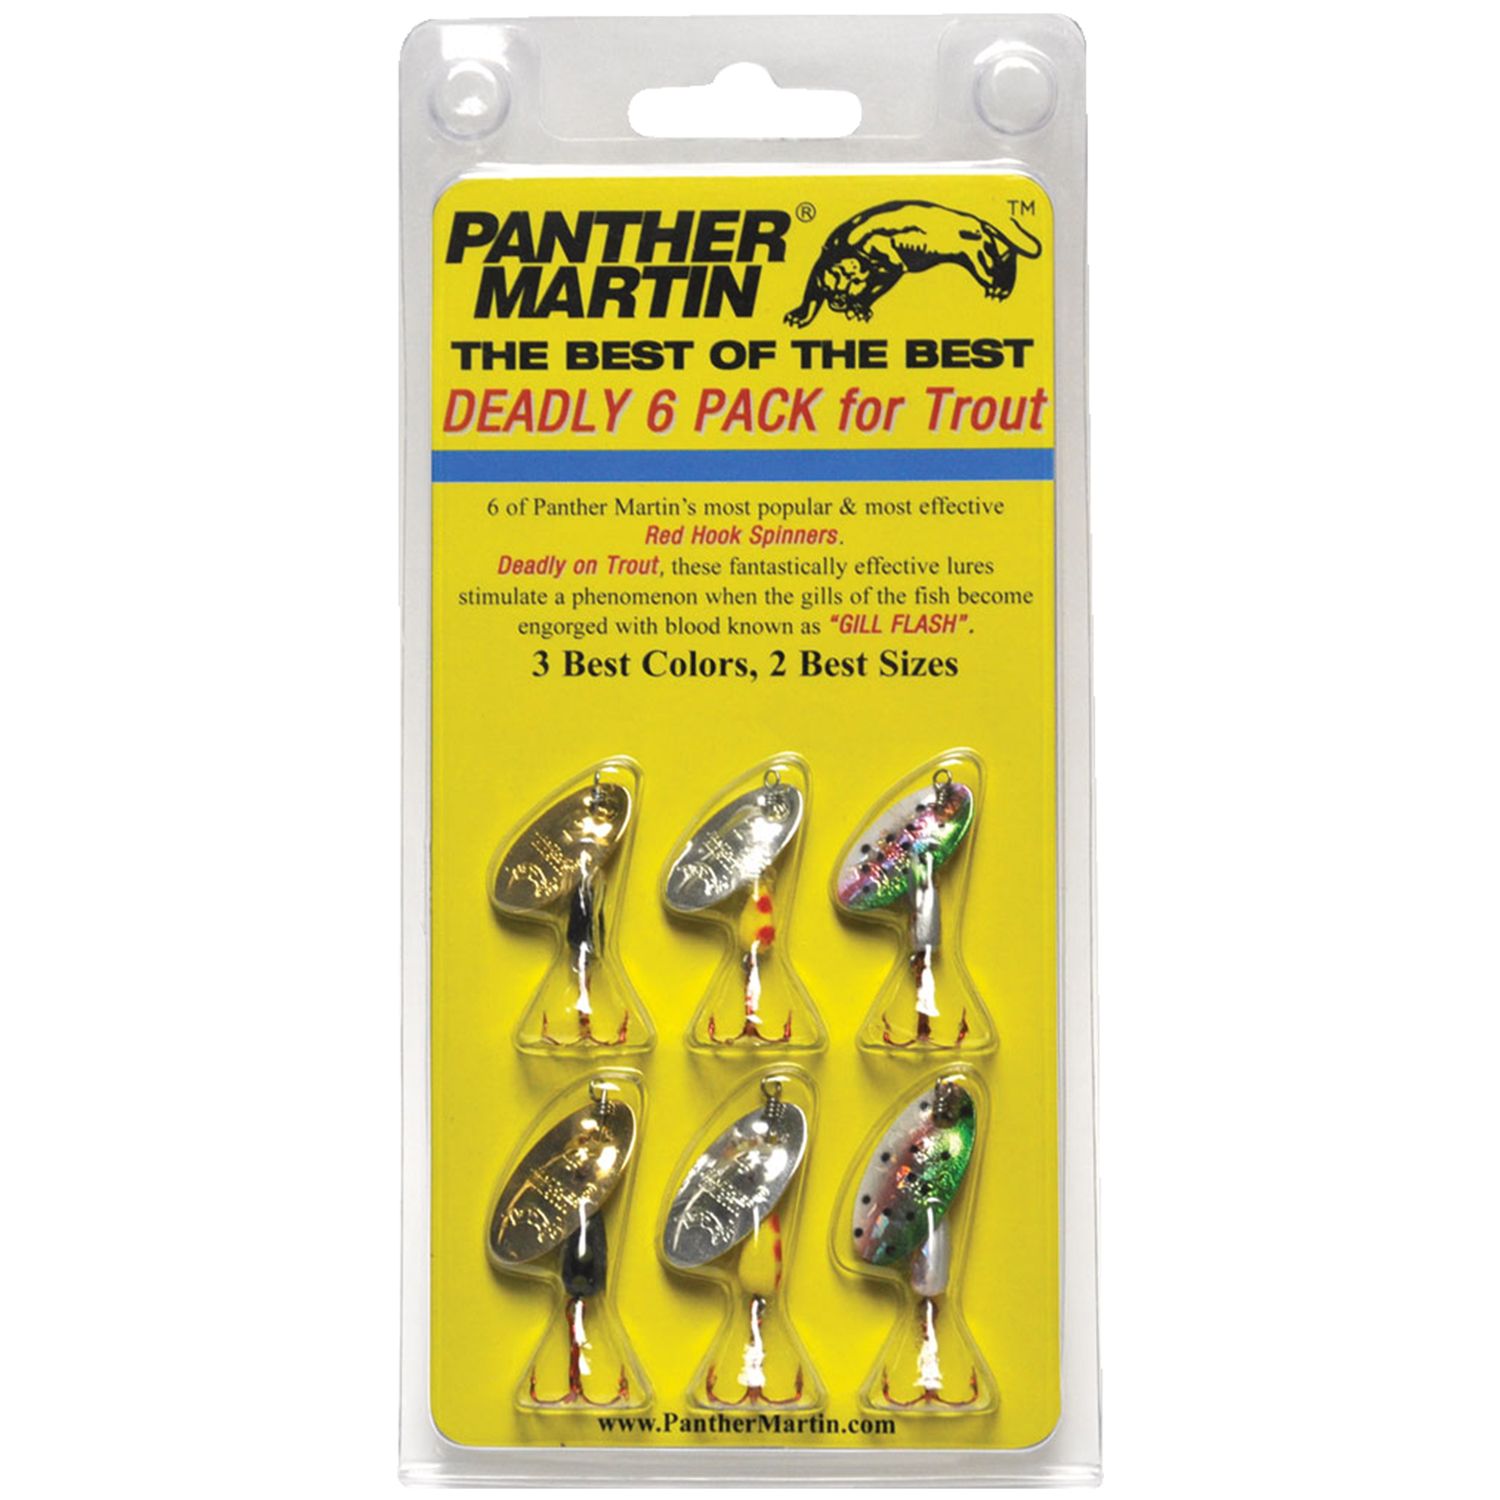 Dick's Sporting Goods Panther Martin Best of the Best Trout